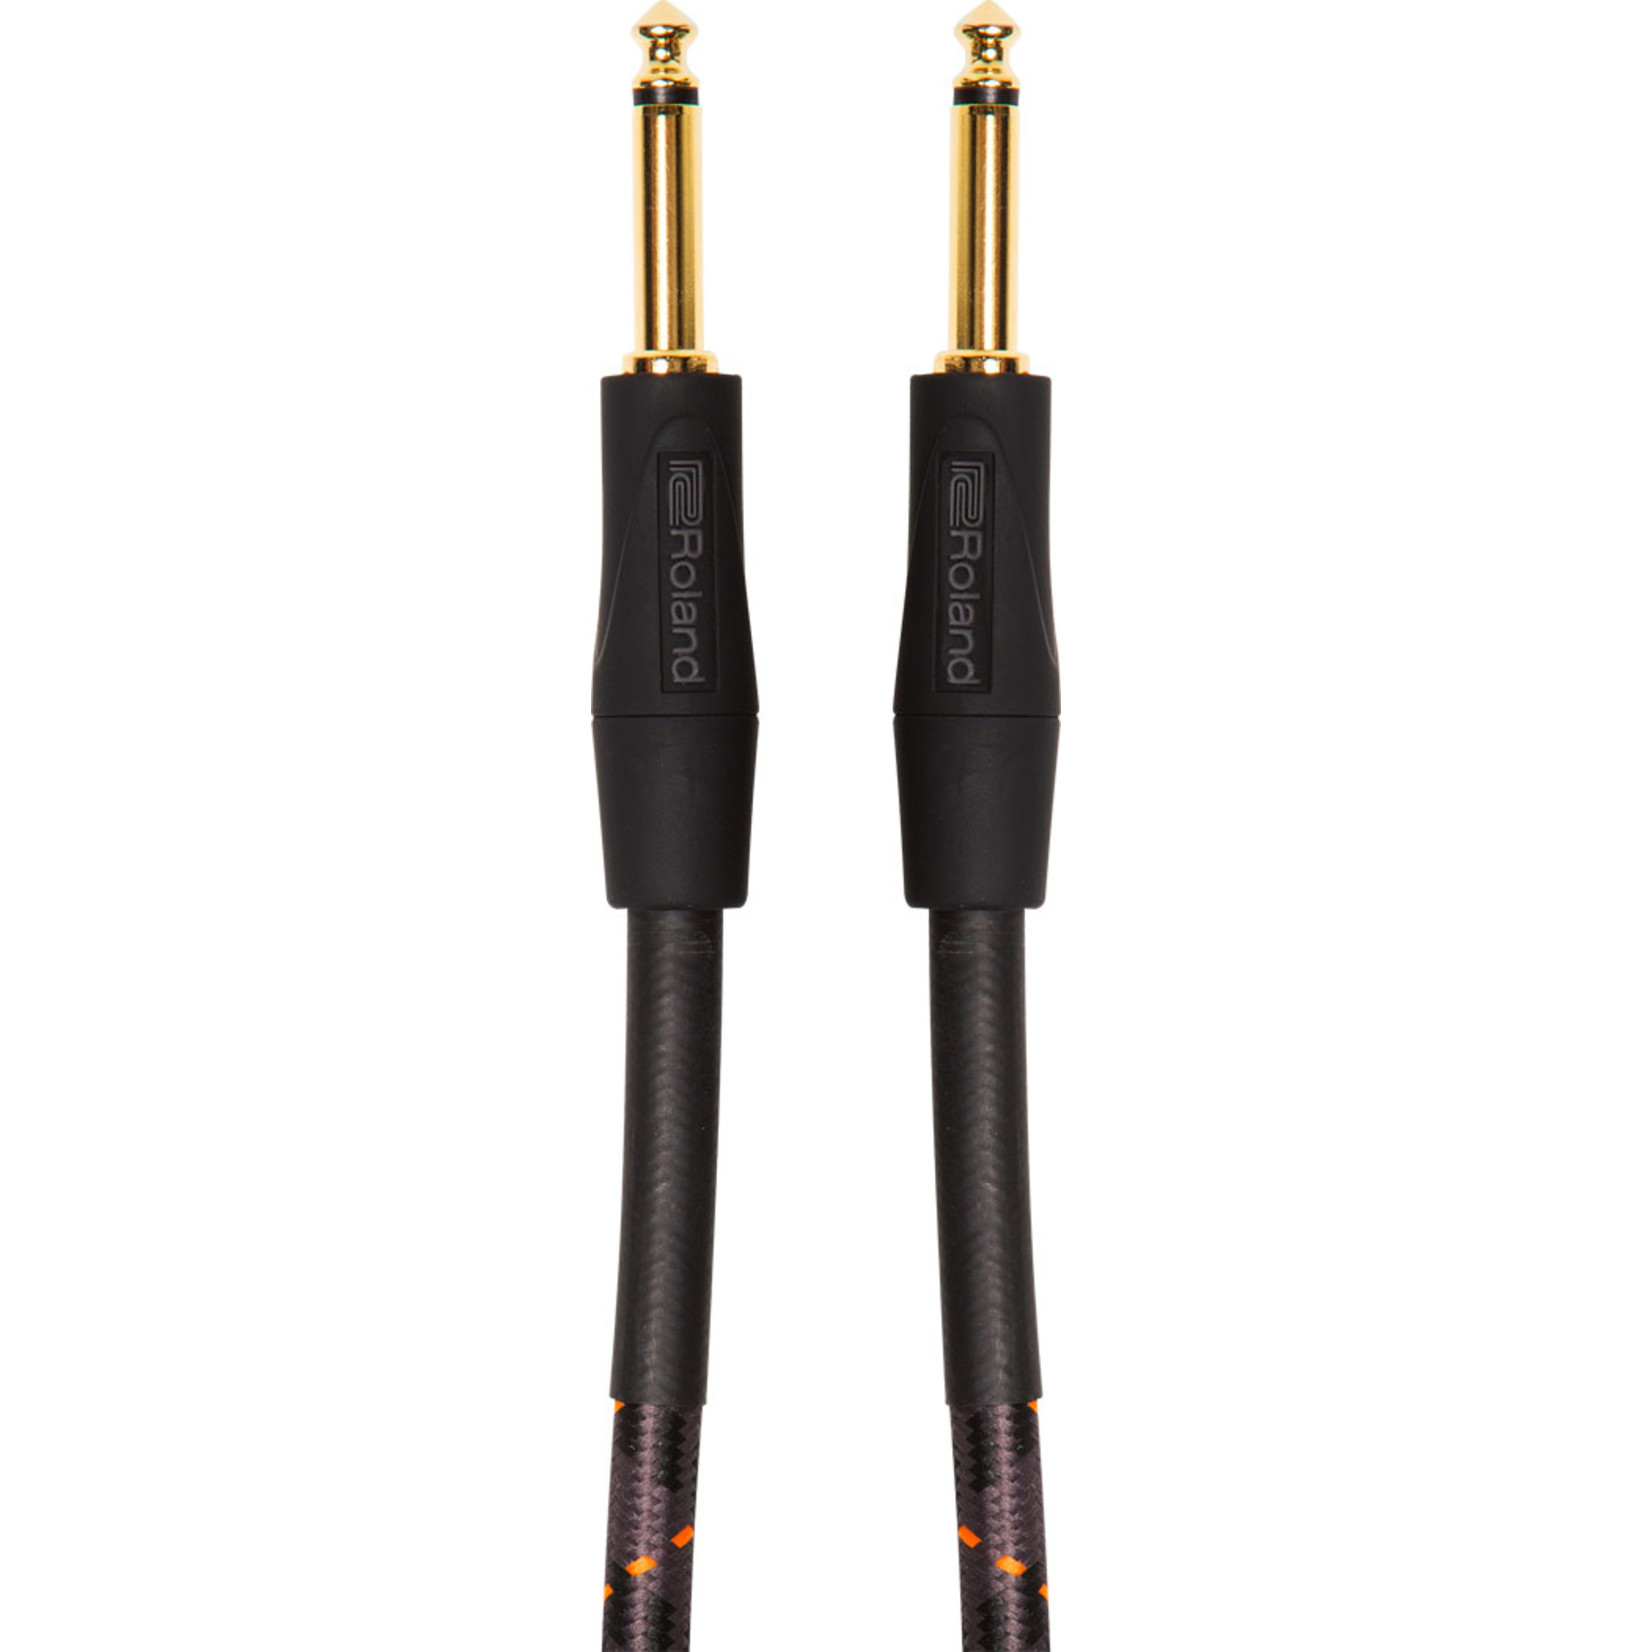 Roland/Boss Roland 20ft Instrument Cable, Angled/Straight 1/4" jack - Gold Series